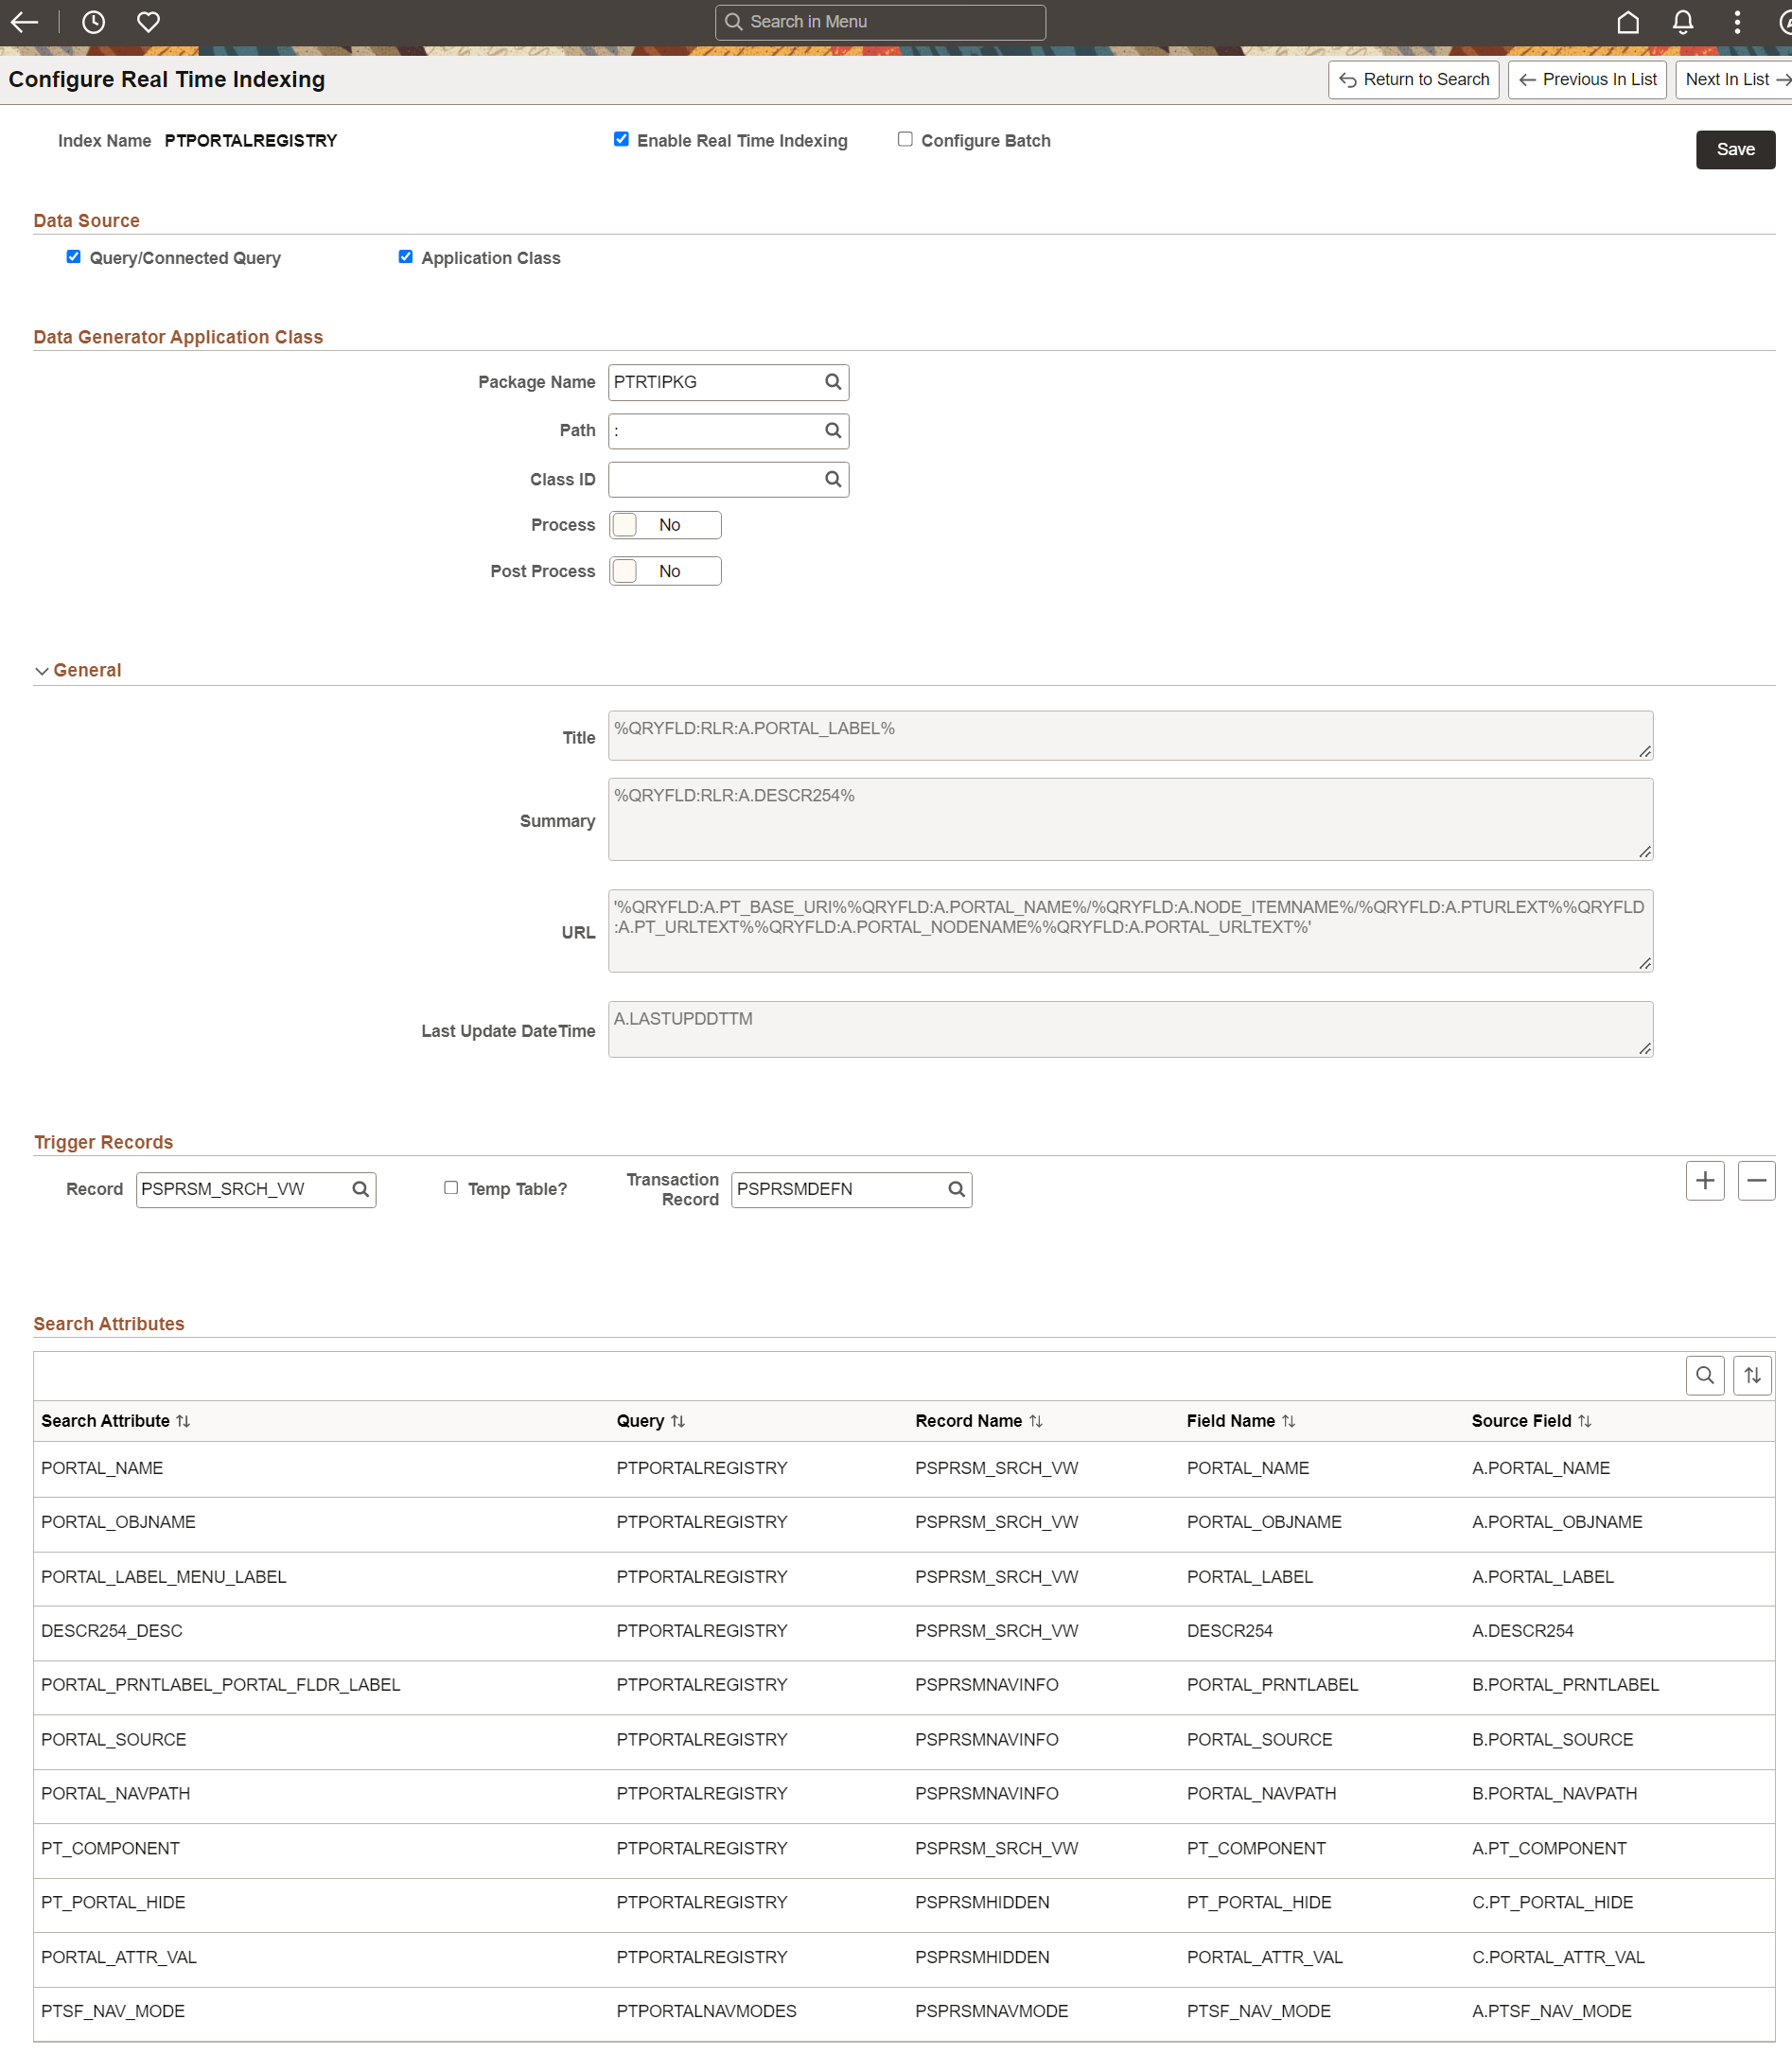 Configure Real Time Indexing page